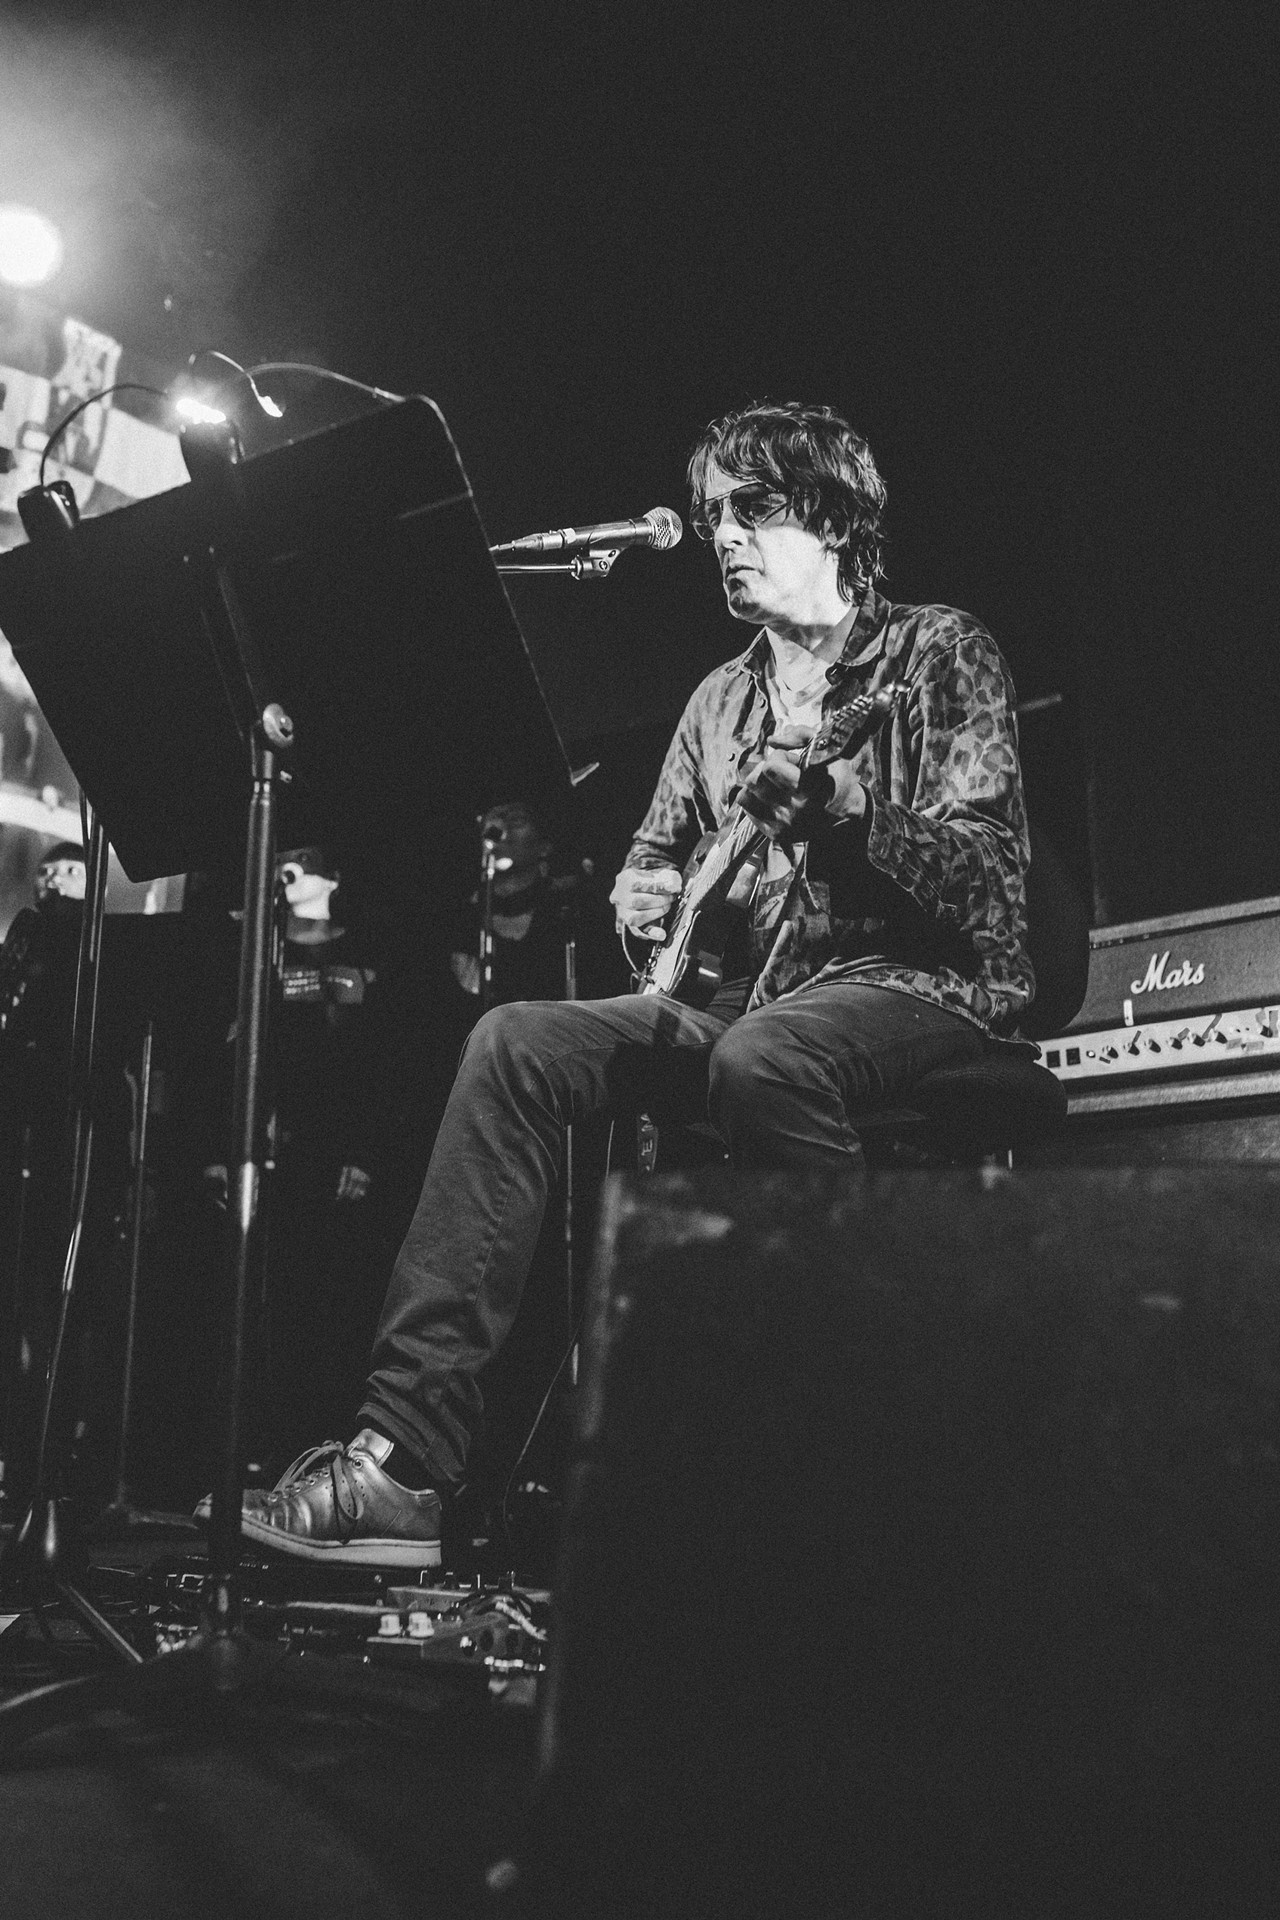 Everything we saw at the Spiritualized show at Saint Andrew's Hall in Detroit